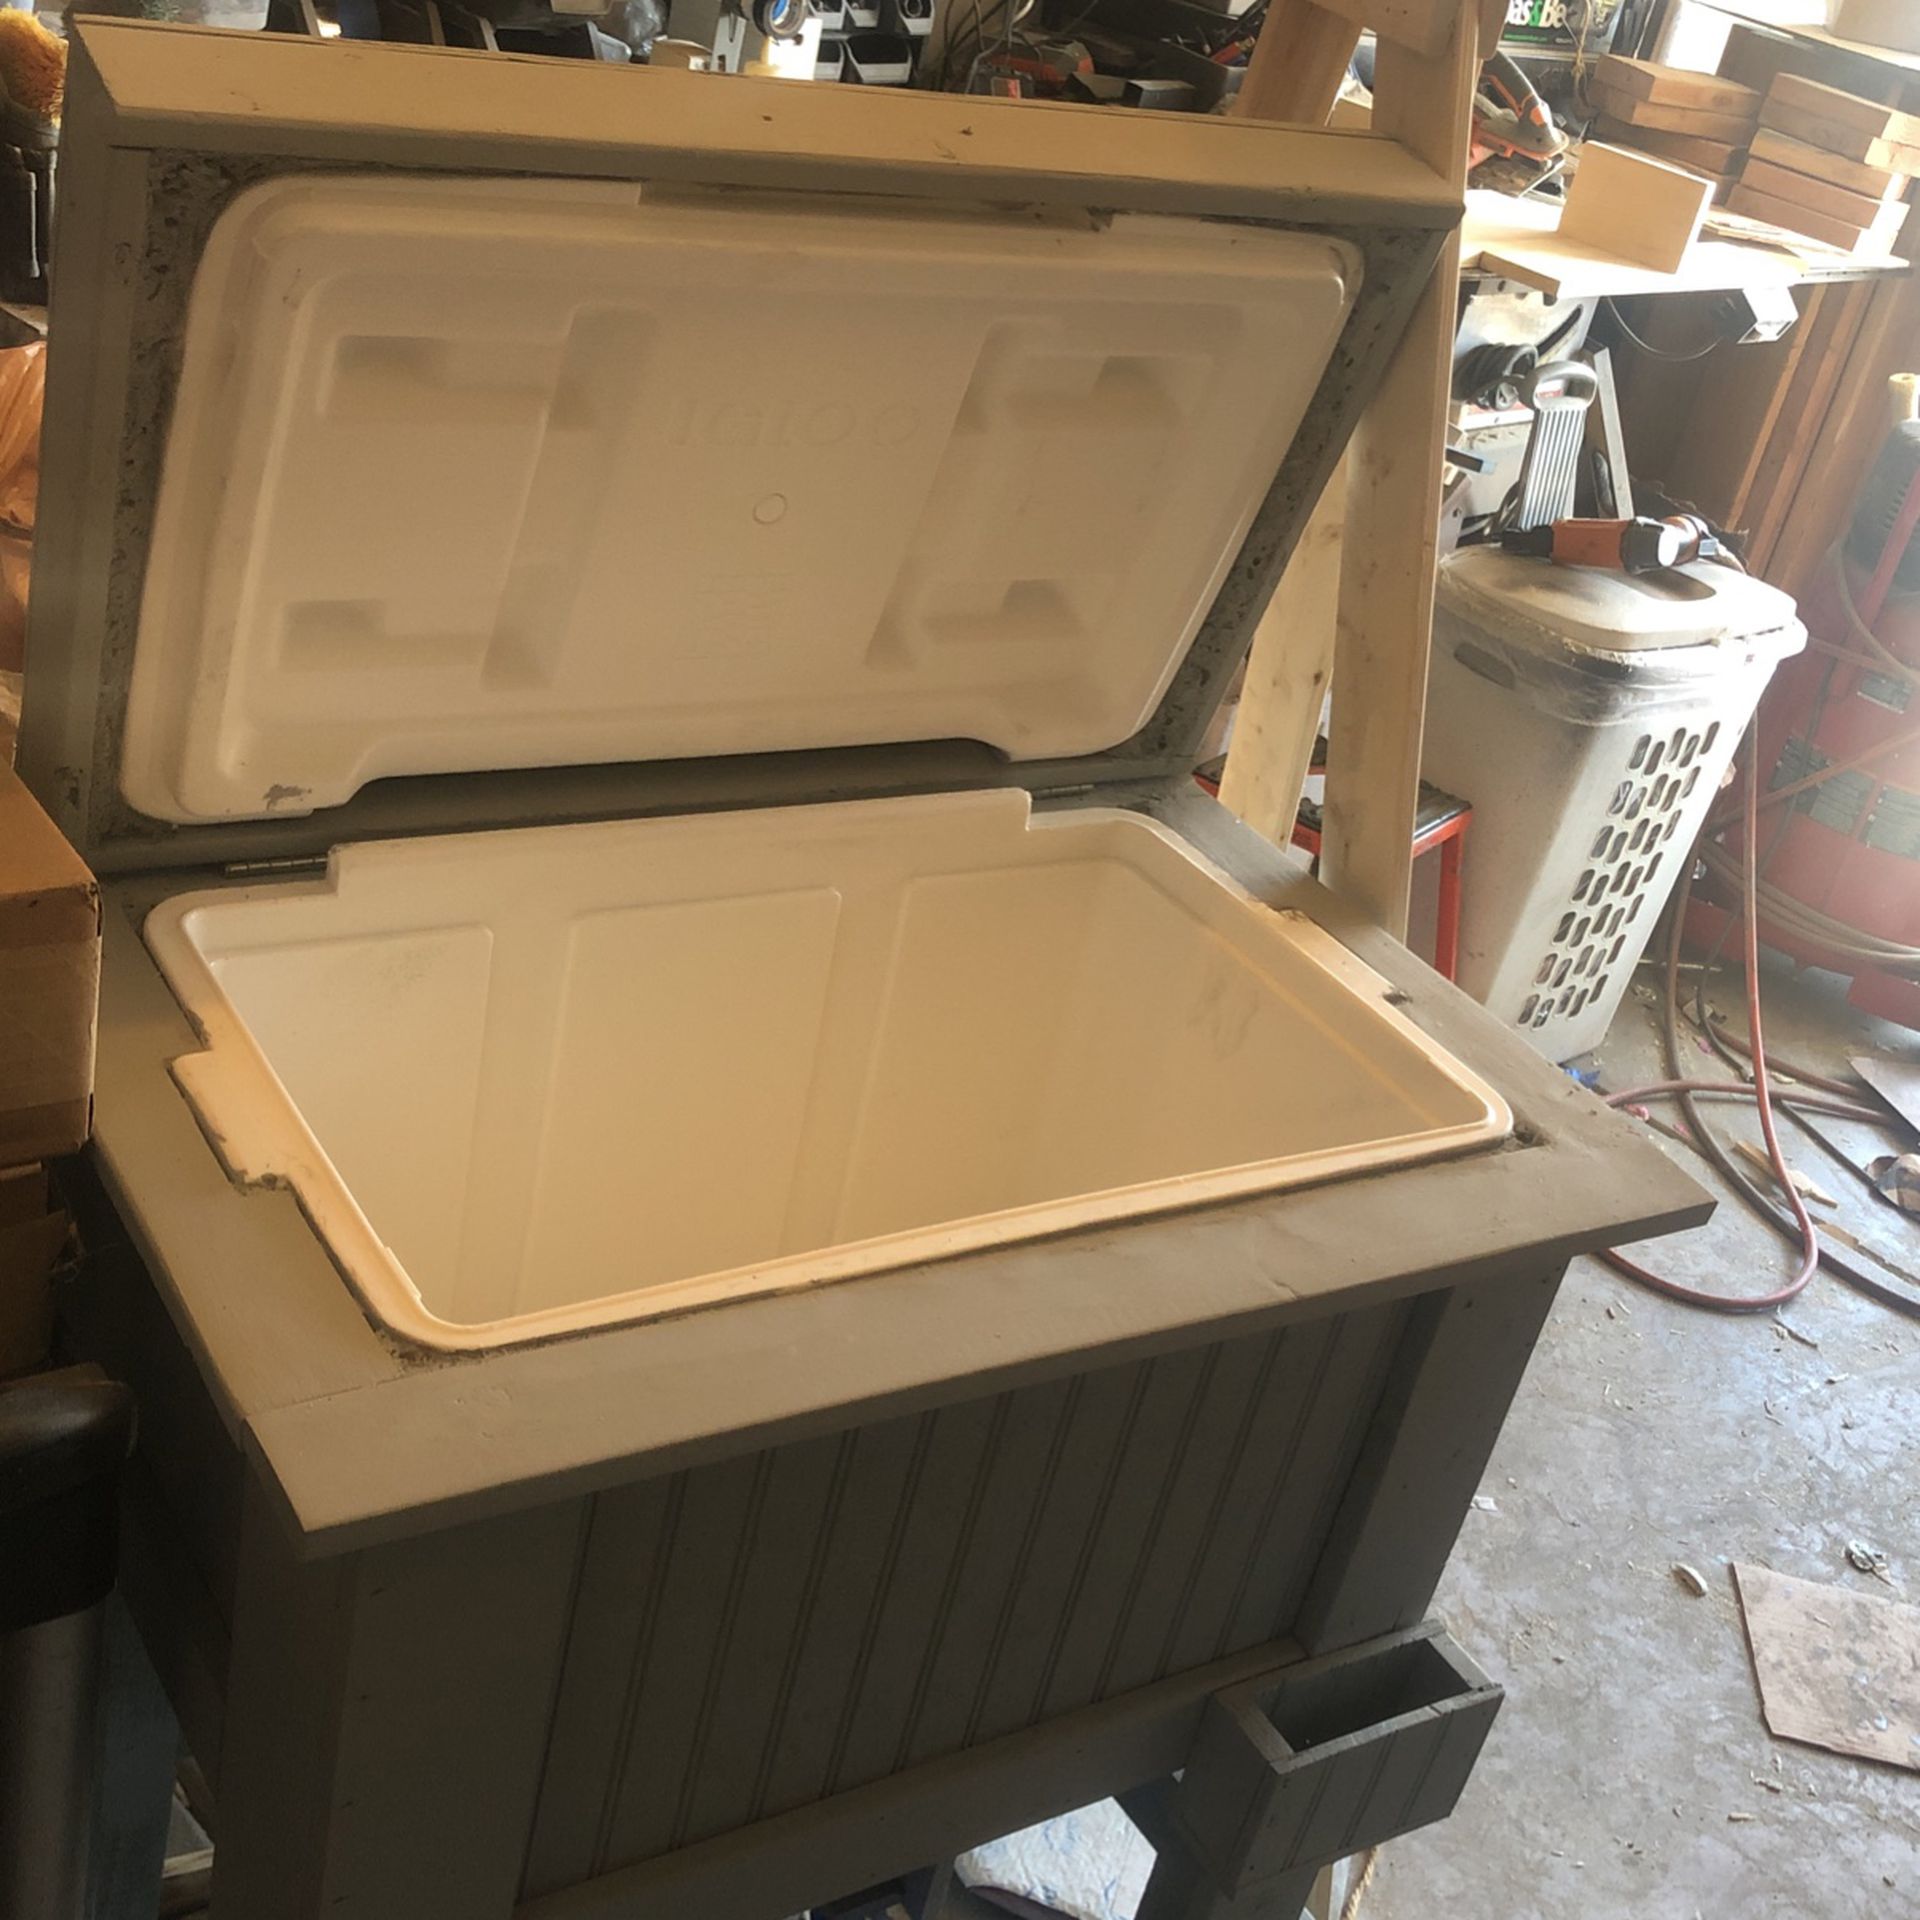 Wood Cooler For Christmas gift